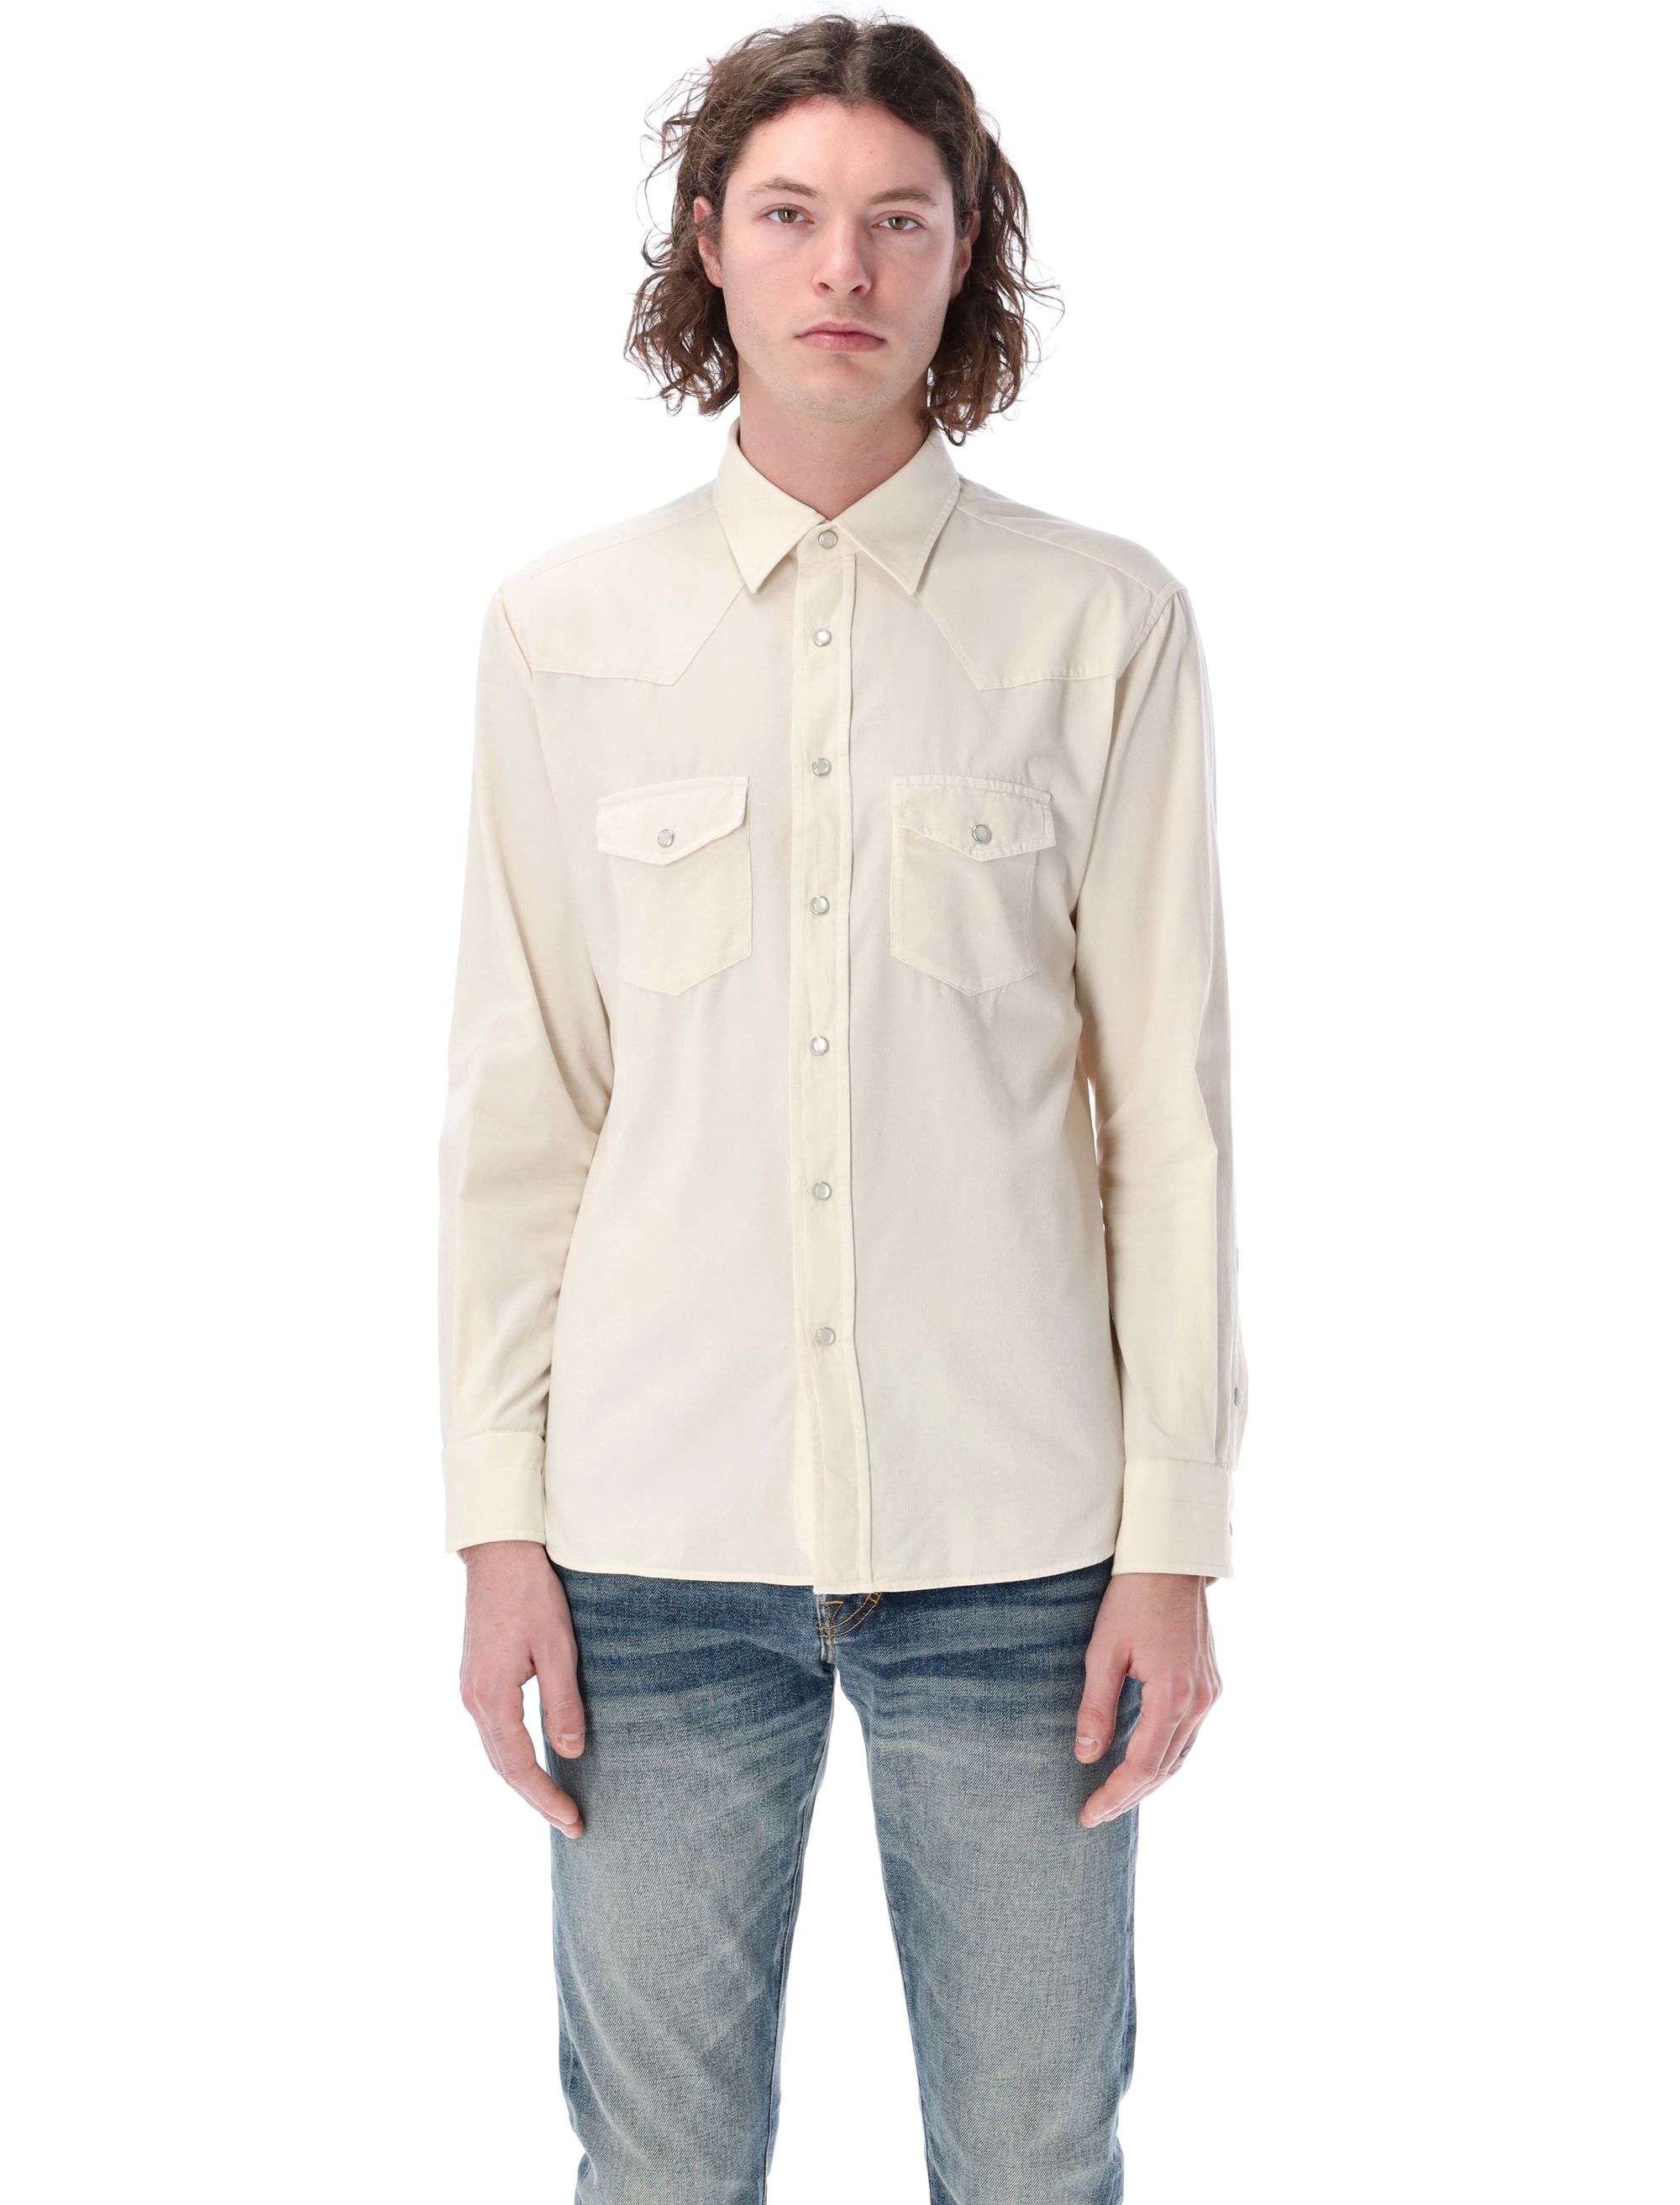 Ribbed cotton shirt, color OFF WHITE | Spazio Pritelli Official Website